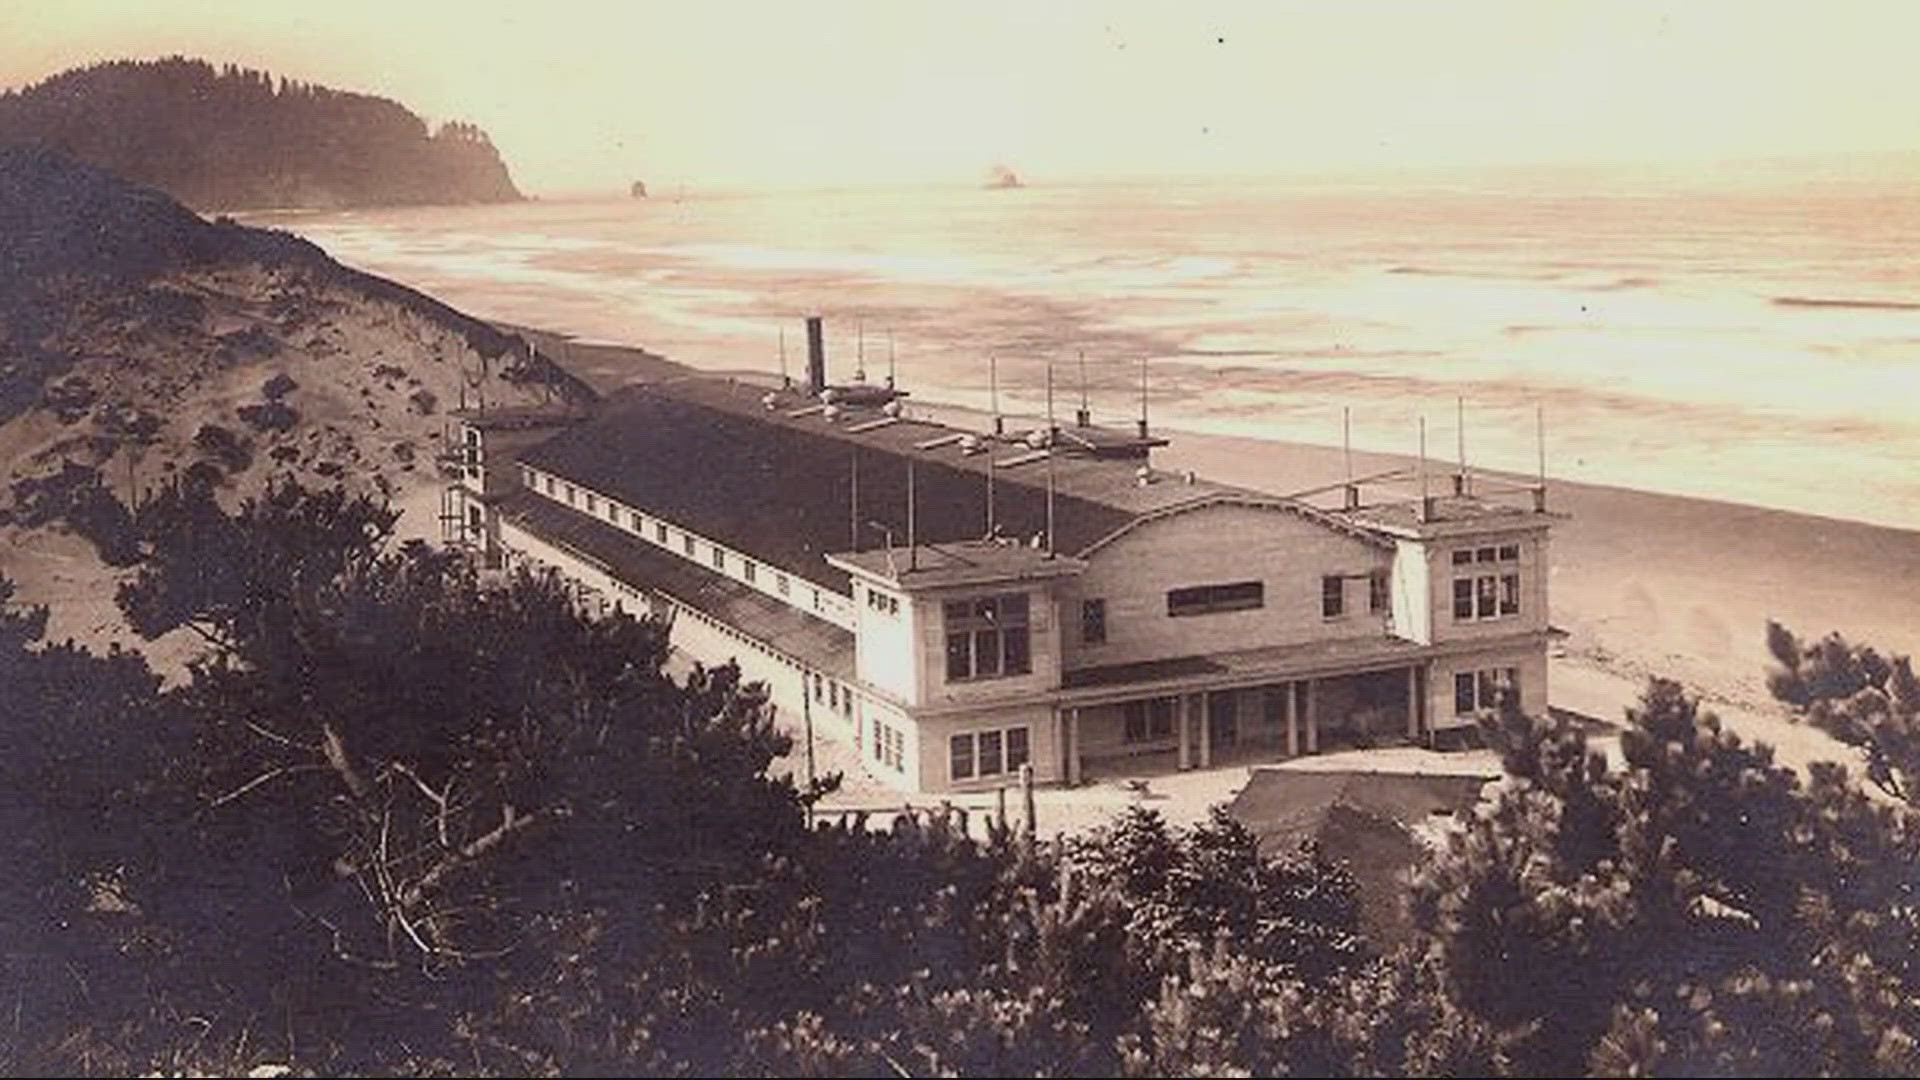 Bayocean was a community built in the early 1900s and was coined "the Atlantic City of the West."